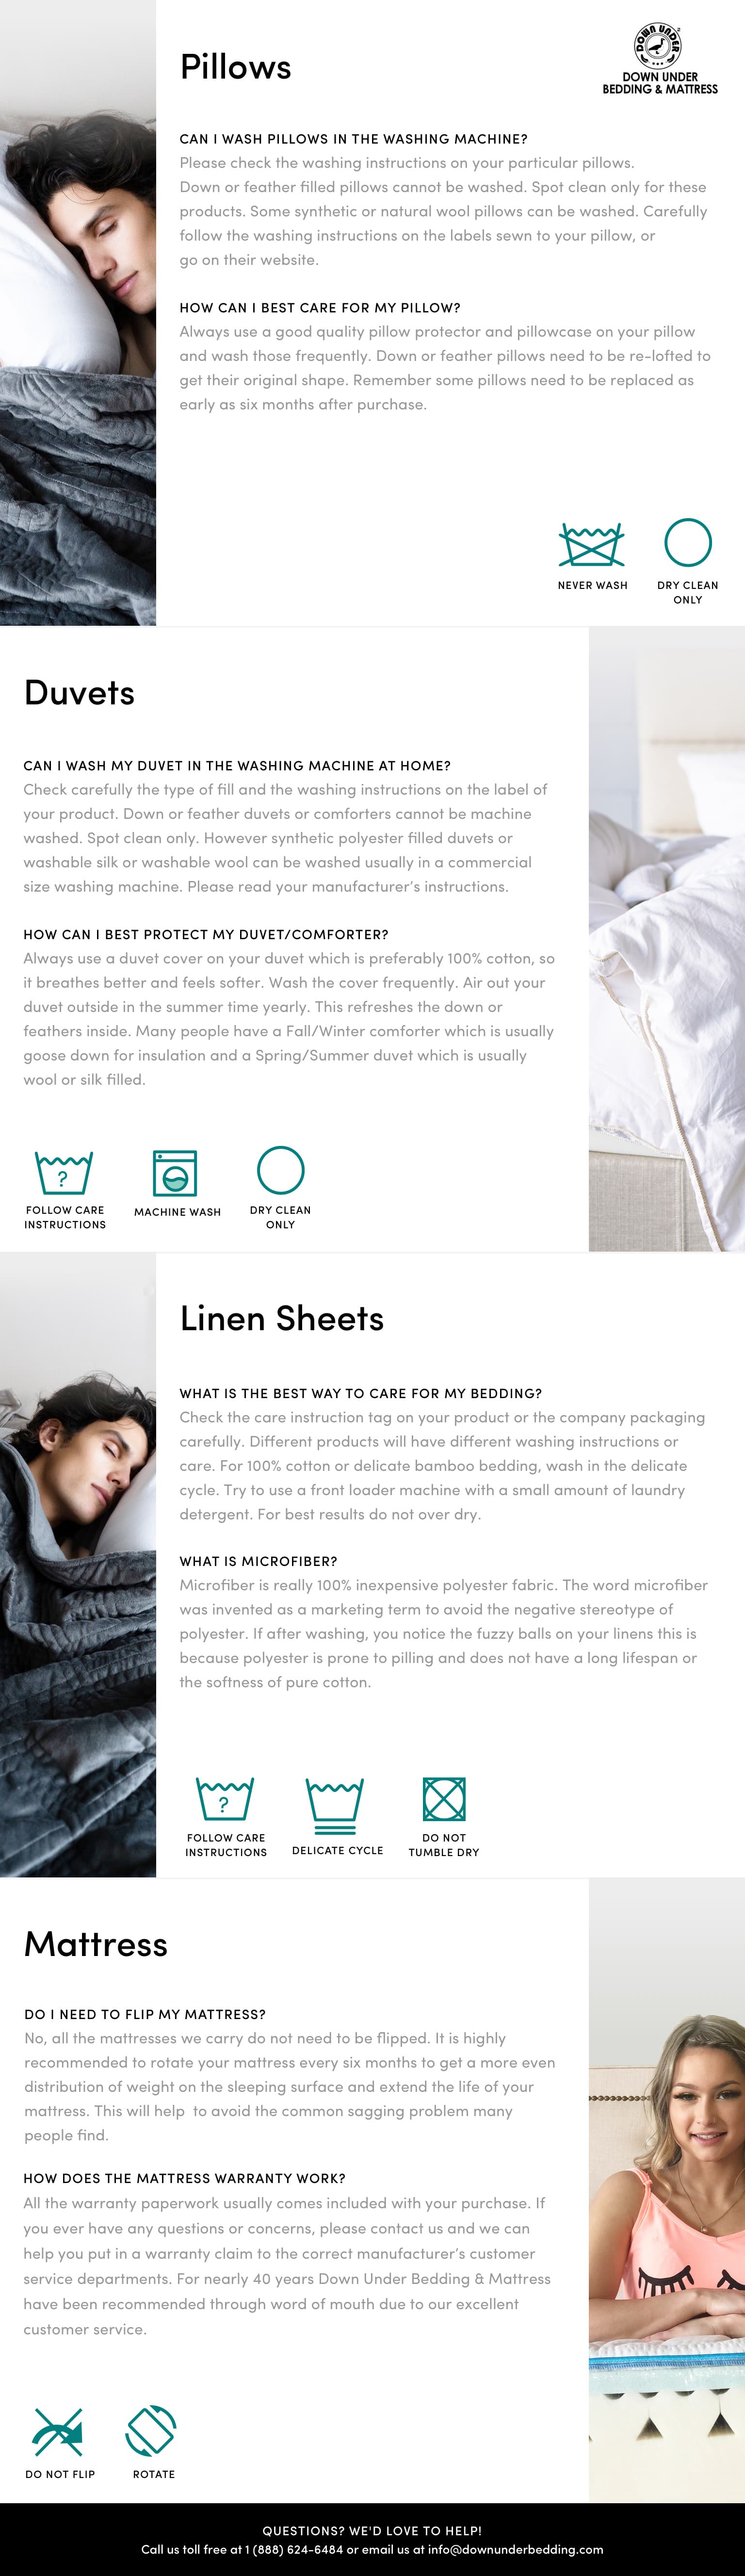 product care - pillows, mattresses and linens - down under bedding